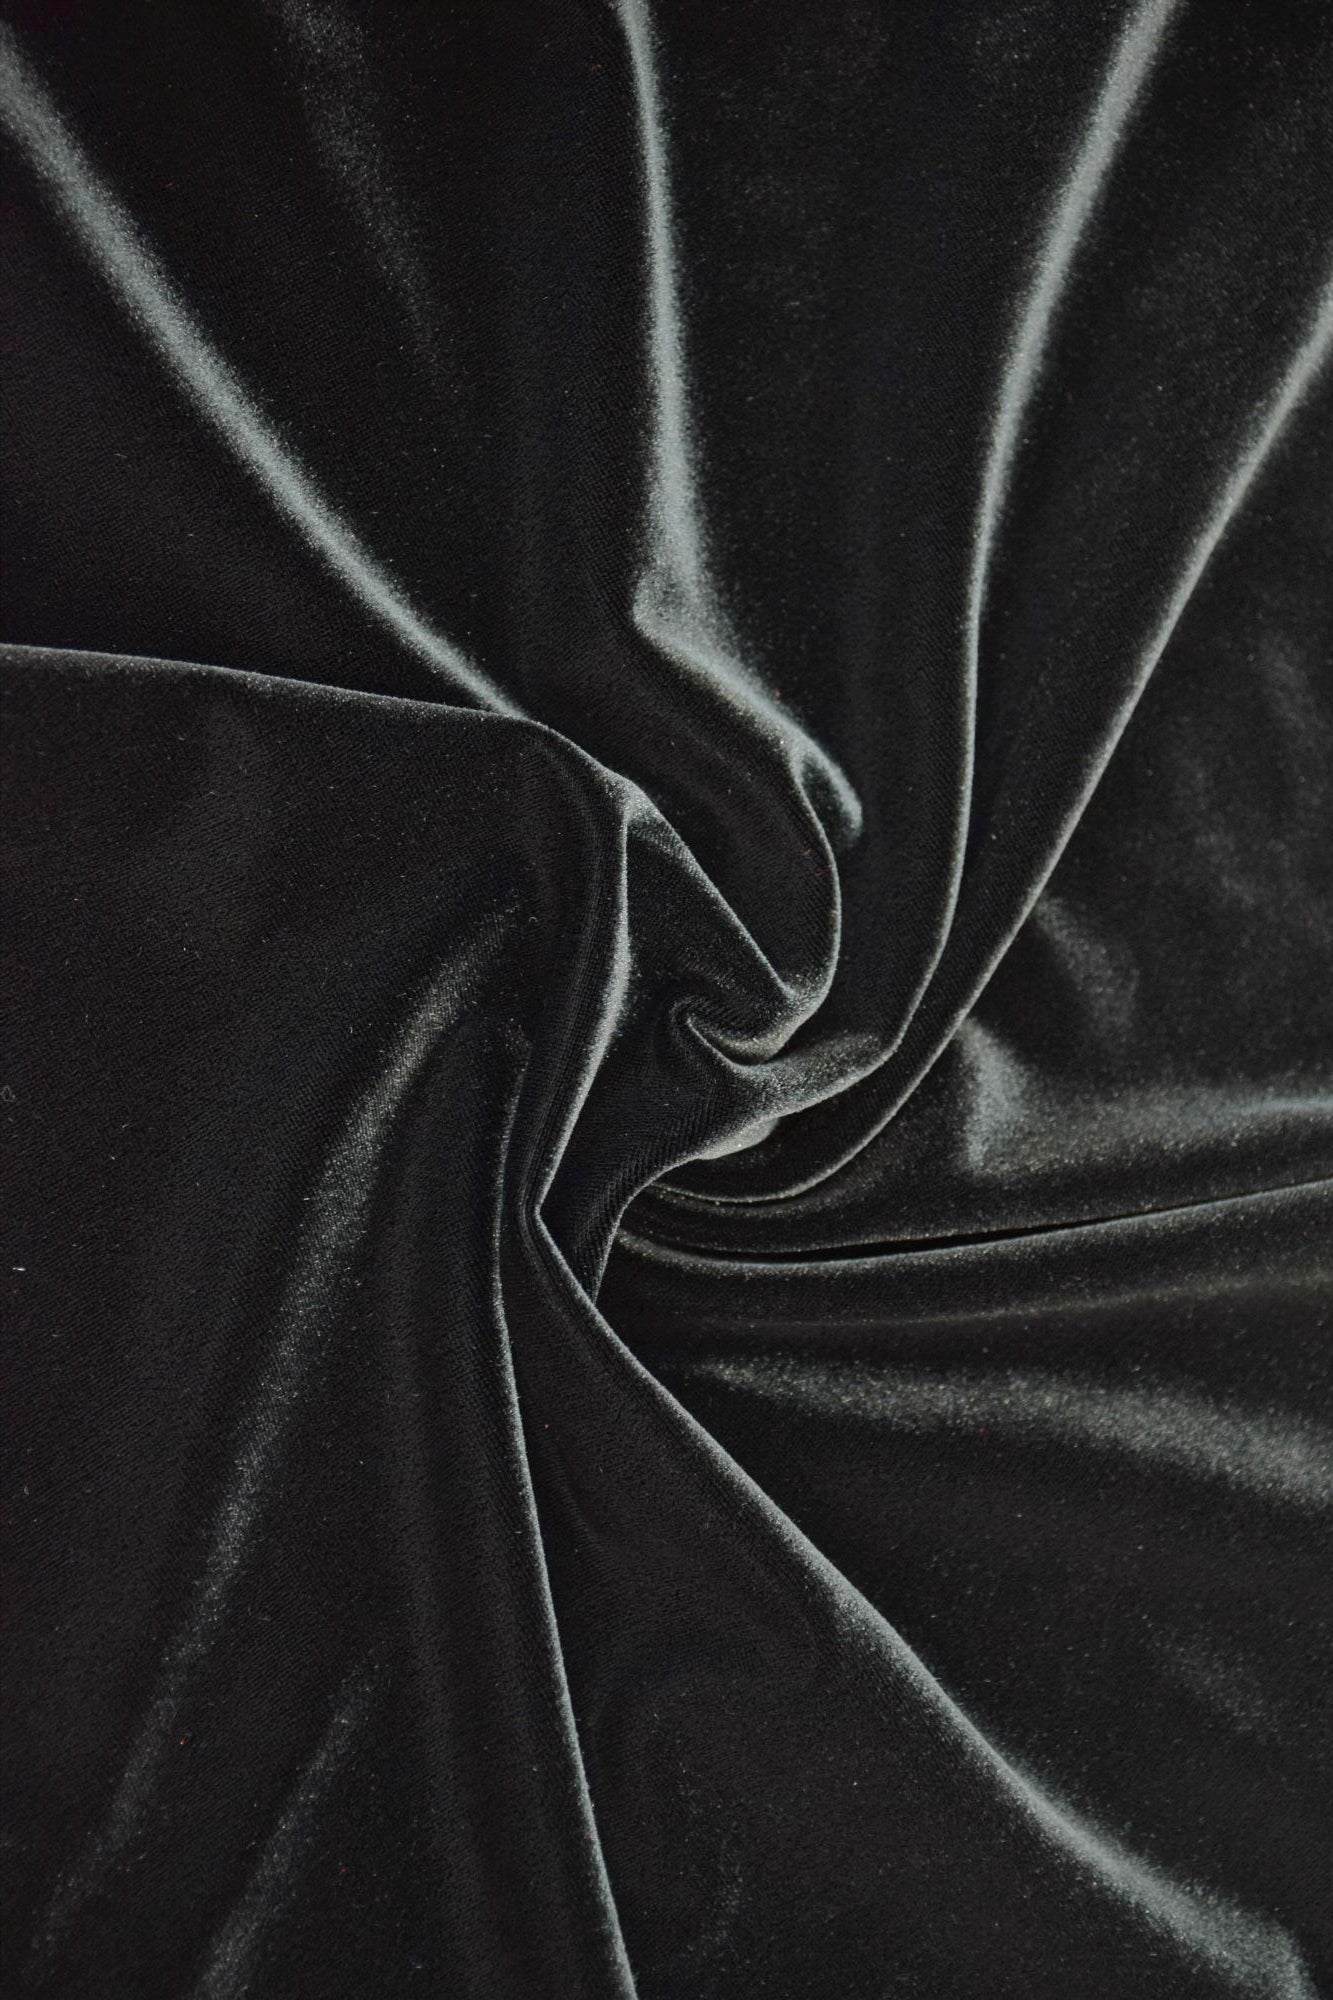 MaiMaiSuan Black Velvet Fabric by The Yard,1 Yard 60 Wide Soft Stretchy  Velvet Cloth for Upholstery Sofa Chair Cover,DIY  Sewing,Costume,Craft,Curtain